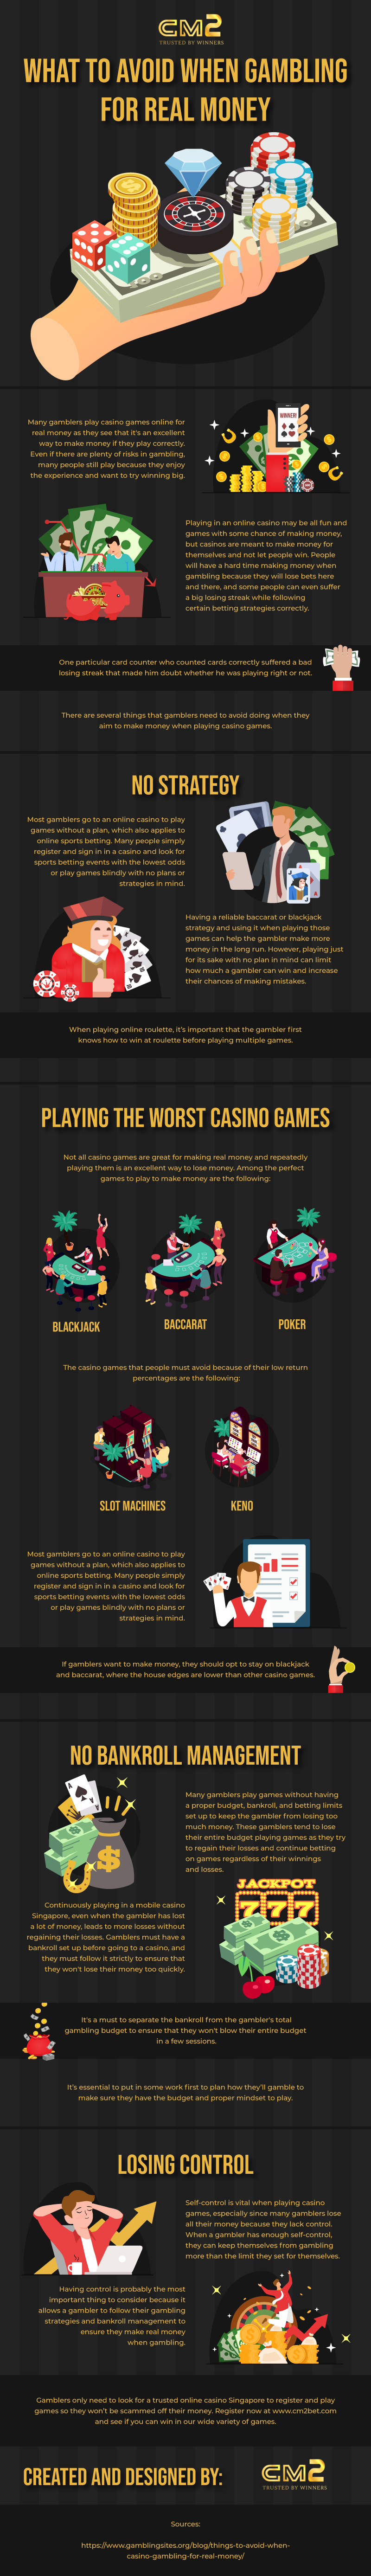 What to Avoid when Gambling for Real Money